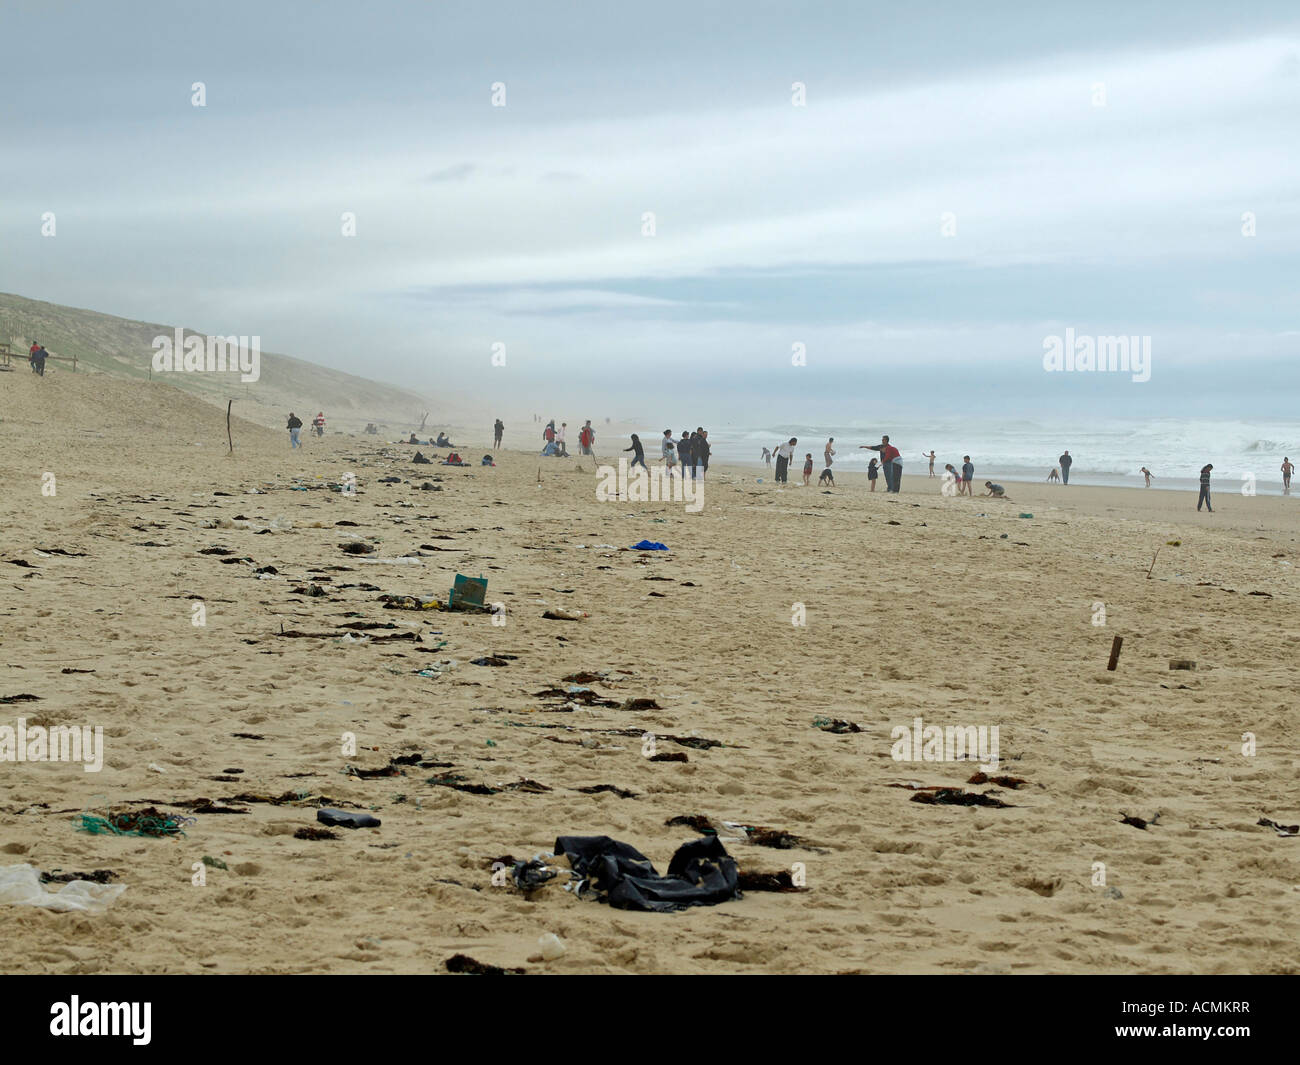 France Landes people on stormy beach with sandstorm and rubbish on sand Stock Photo